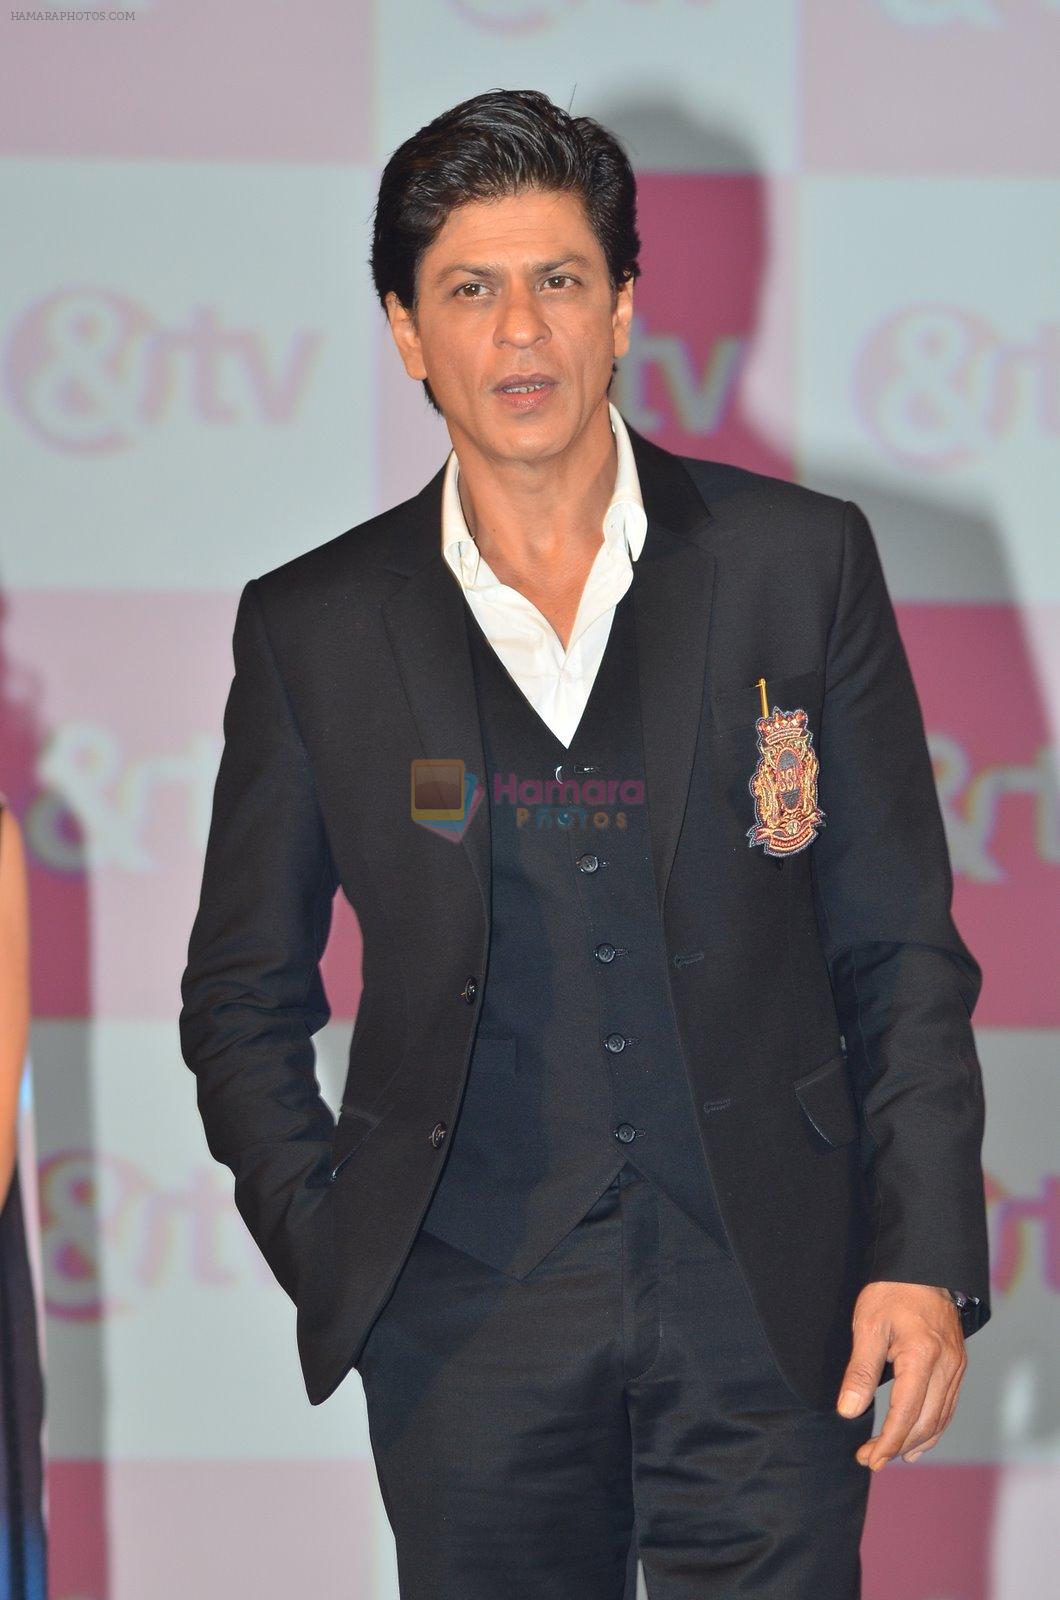 Shah Rukh Khan at the launch of new Hindi entertainment channel &TV in Filmcity, Mumbai on 21st Jan 2015